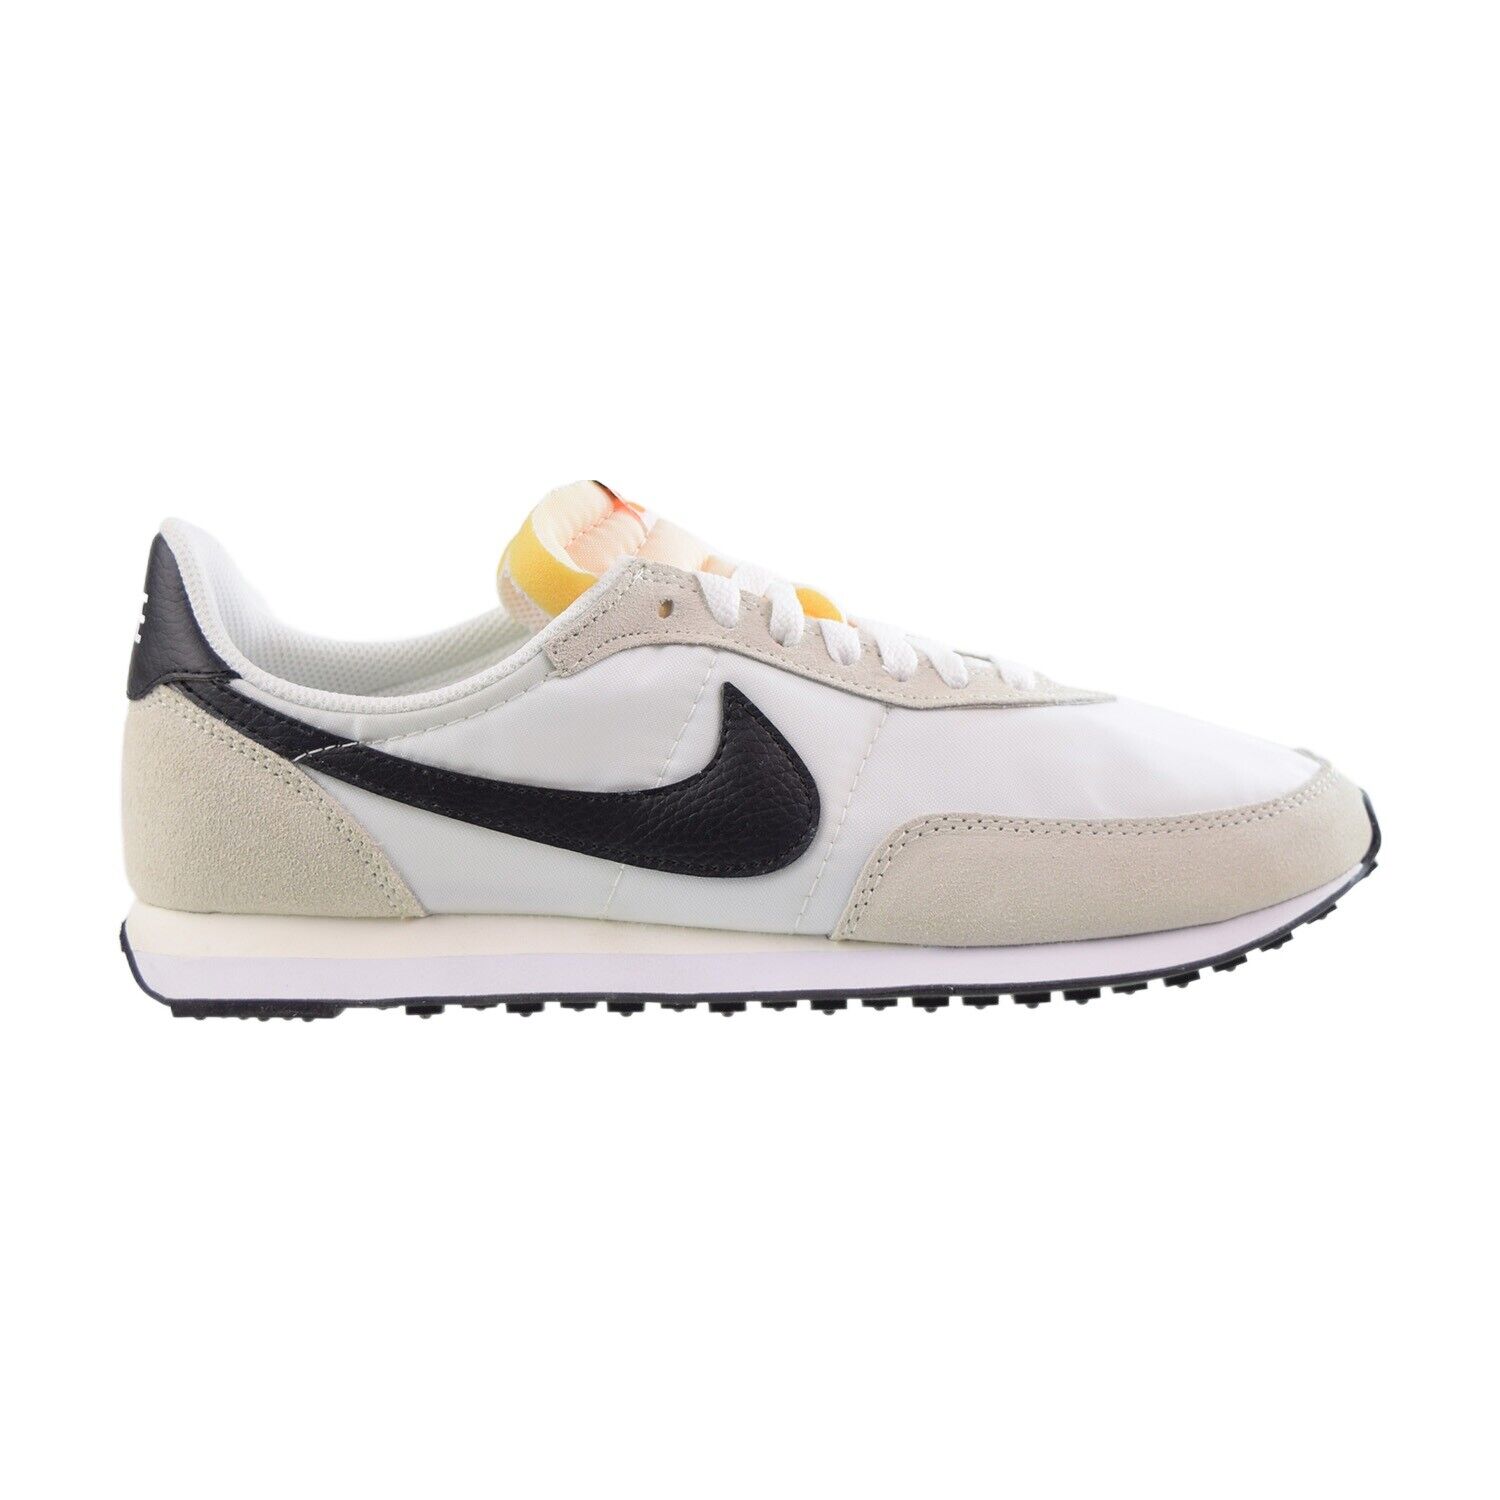 Nike Waffle Trainer 2 Men's Shoes White-Black DH1349-100